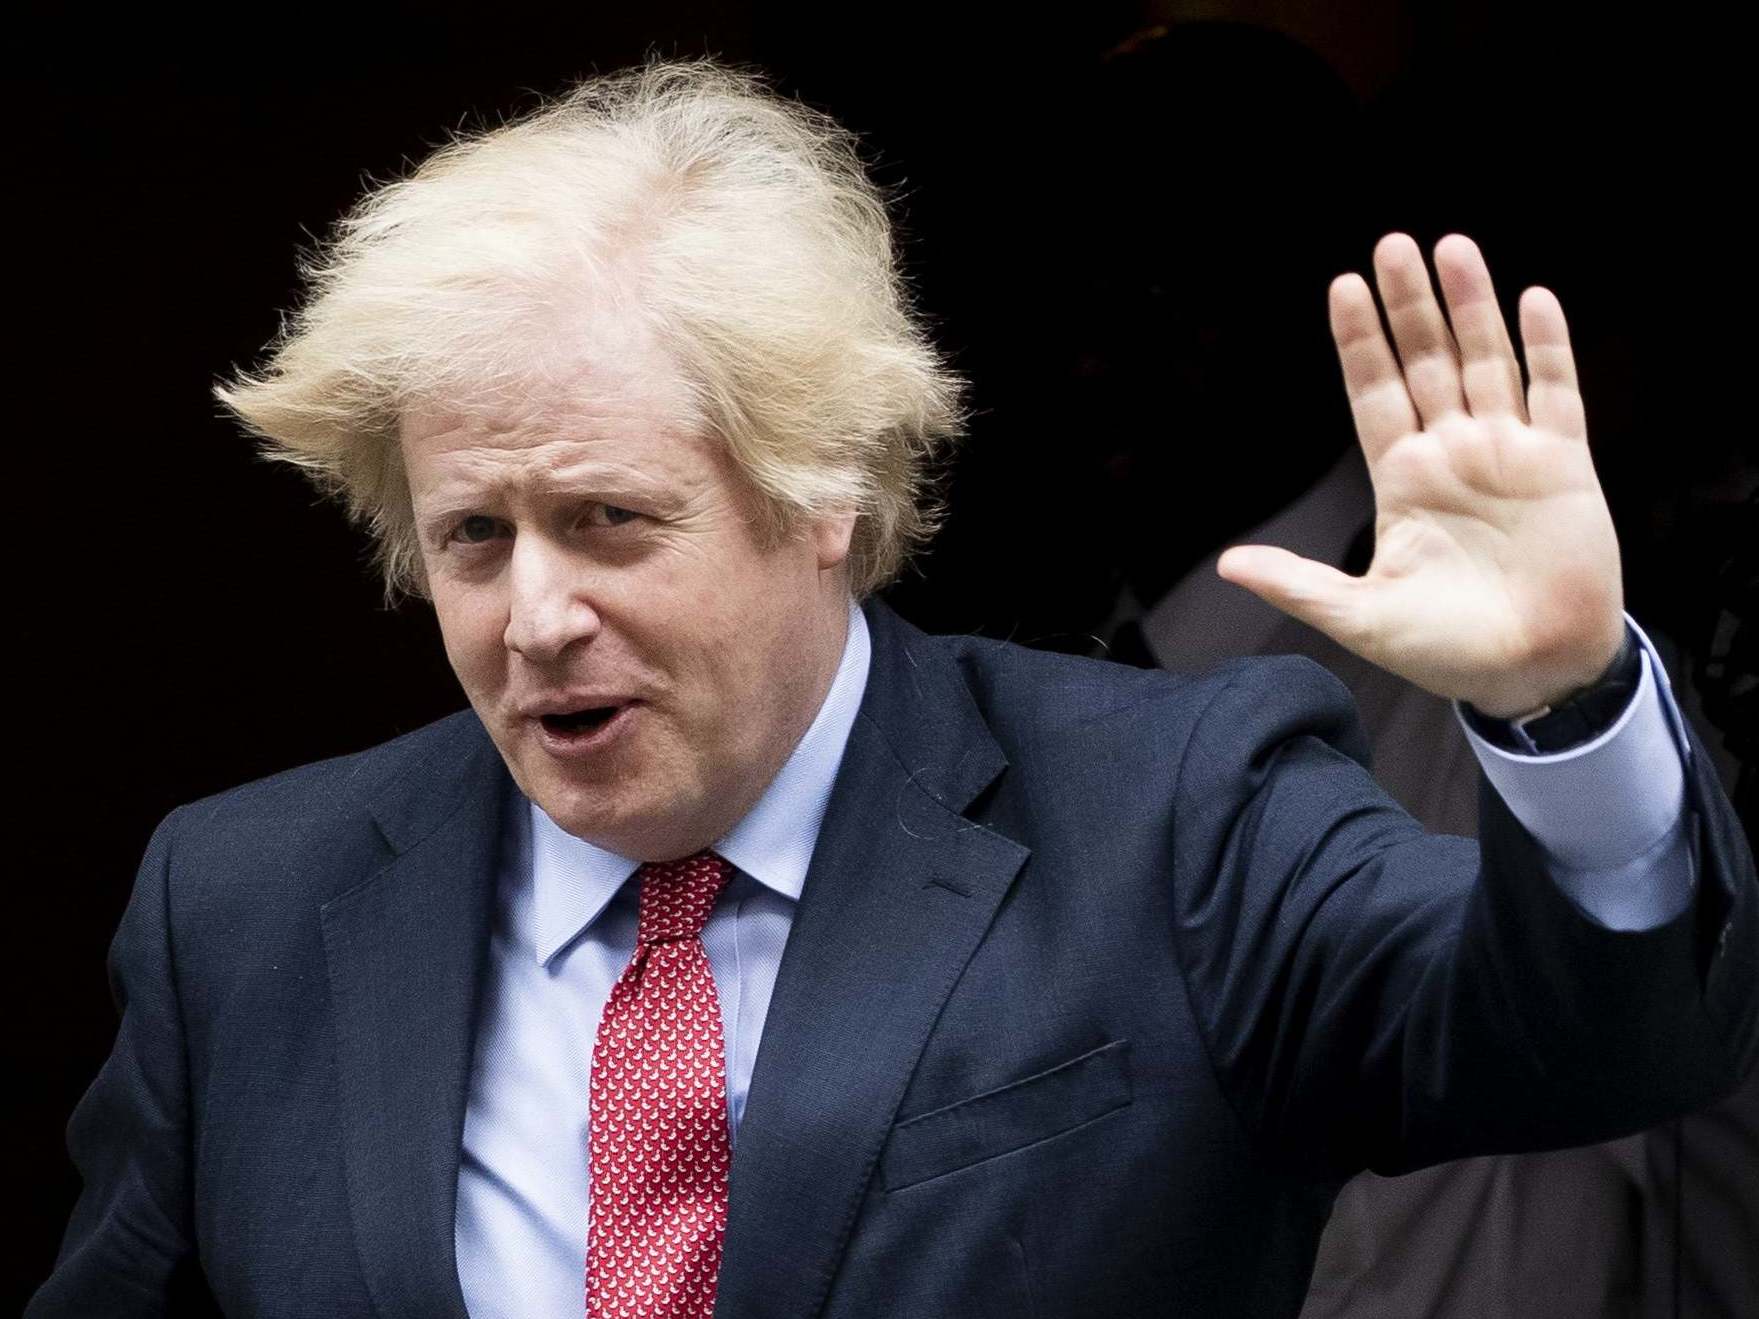 Many thought Boris Johnson wouldn’t last long, because they believed he would fail to deliver Brexit